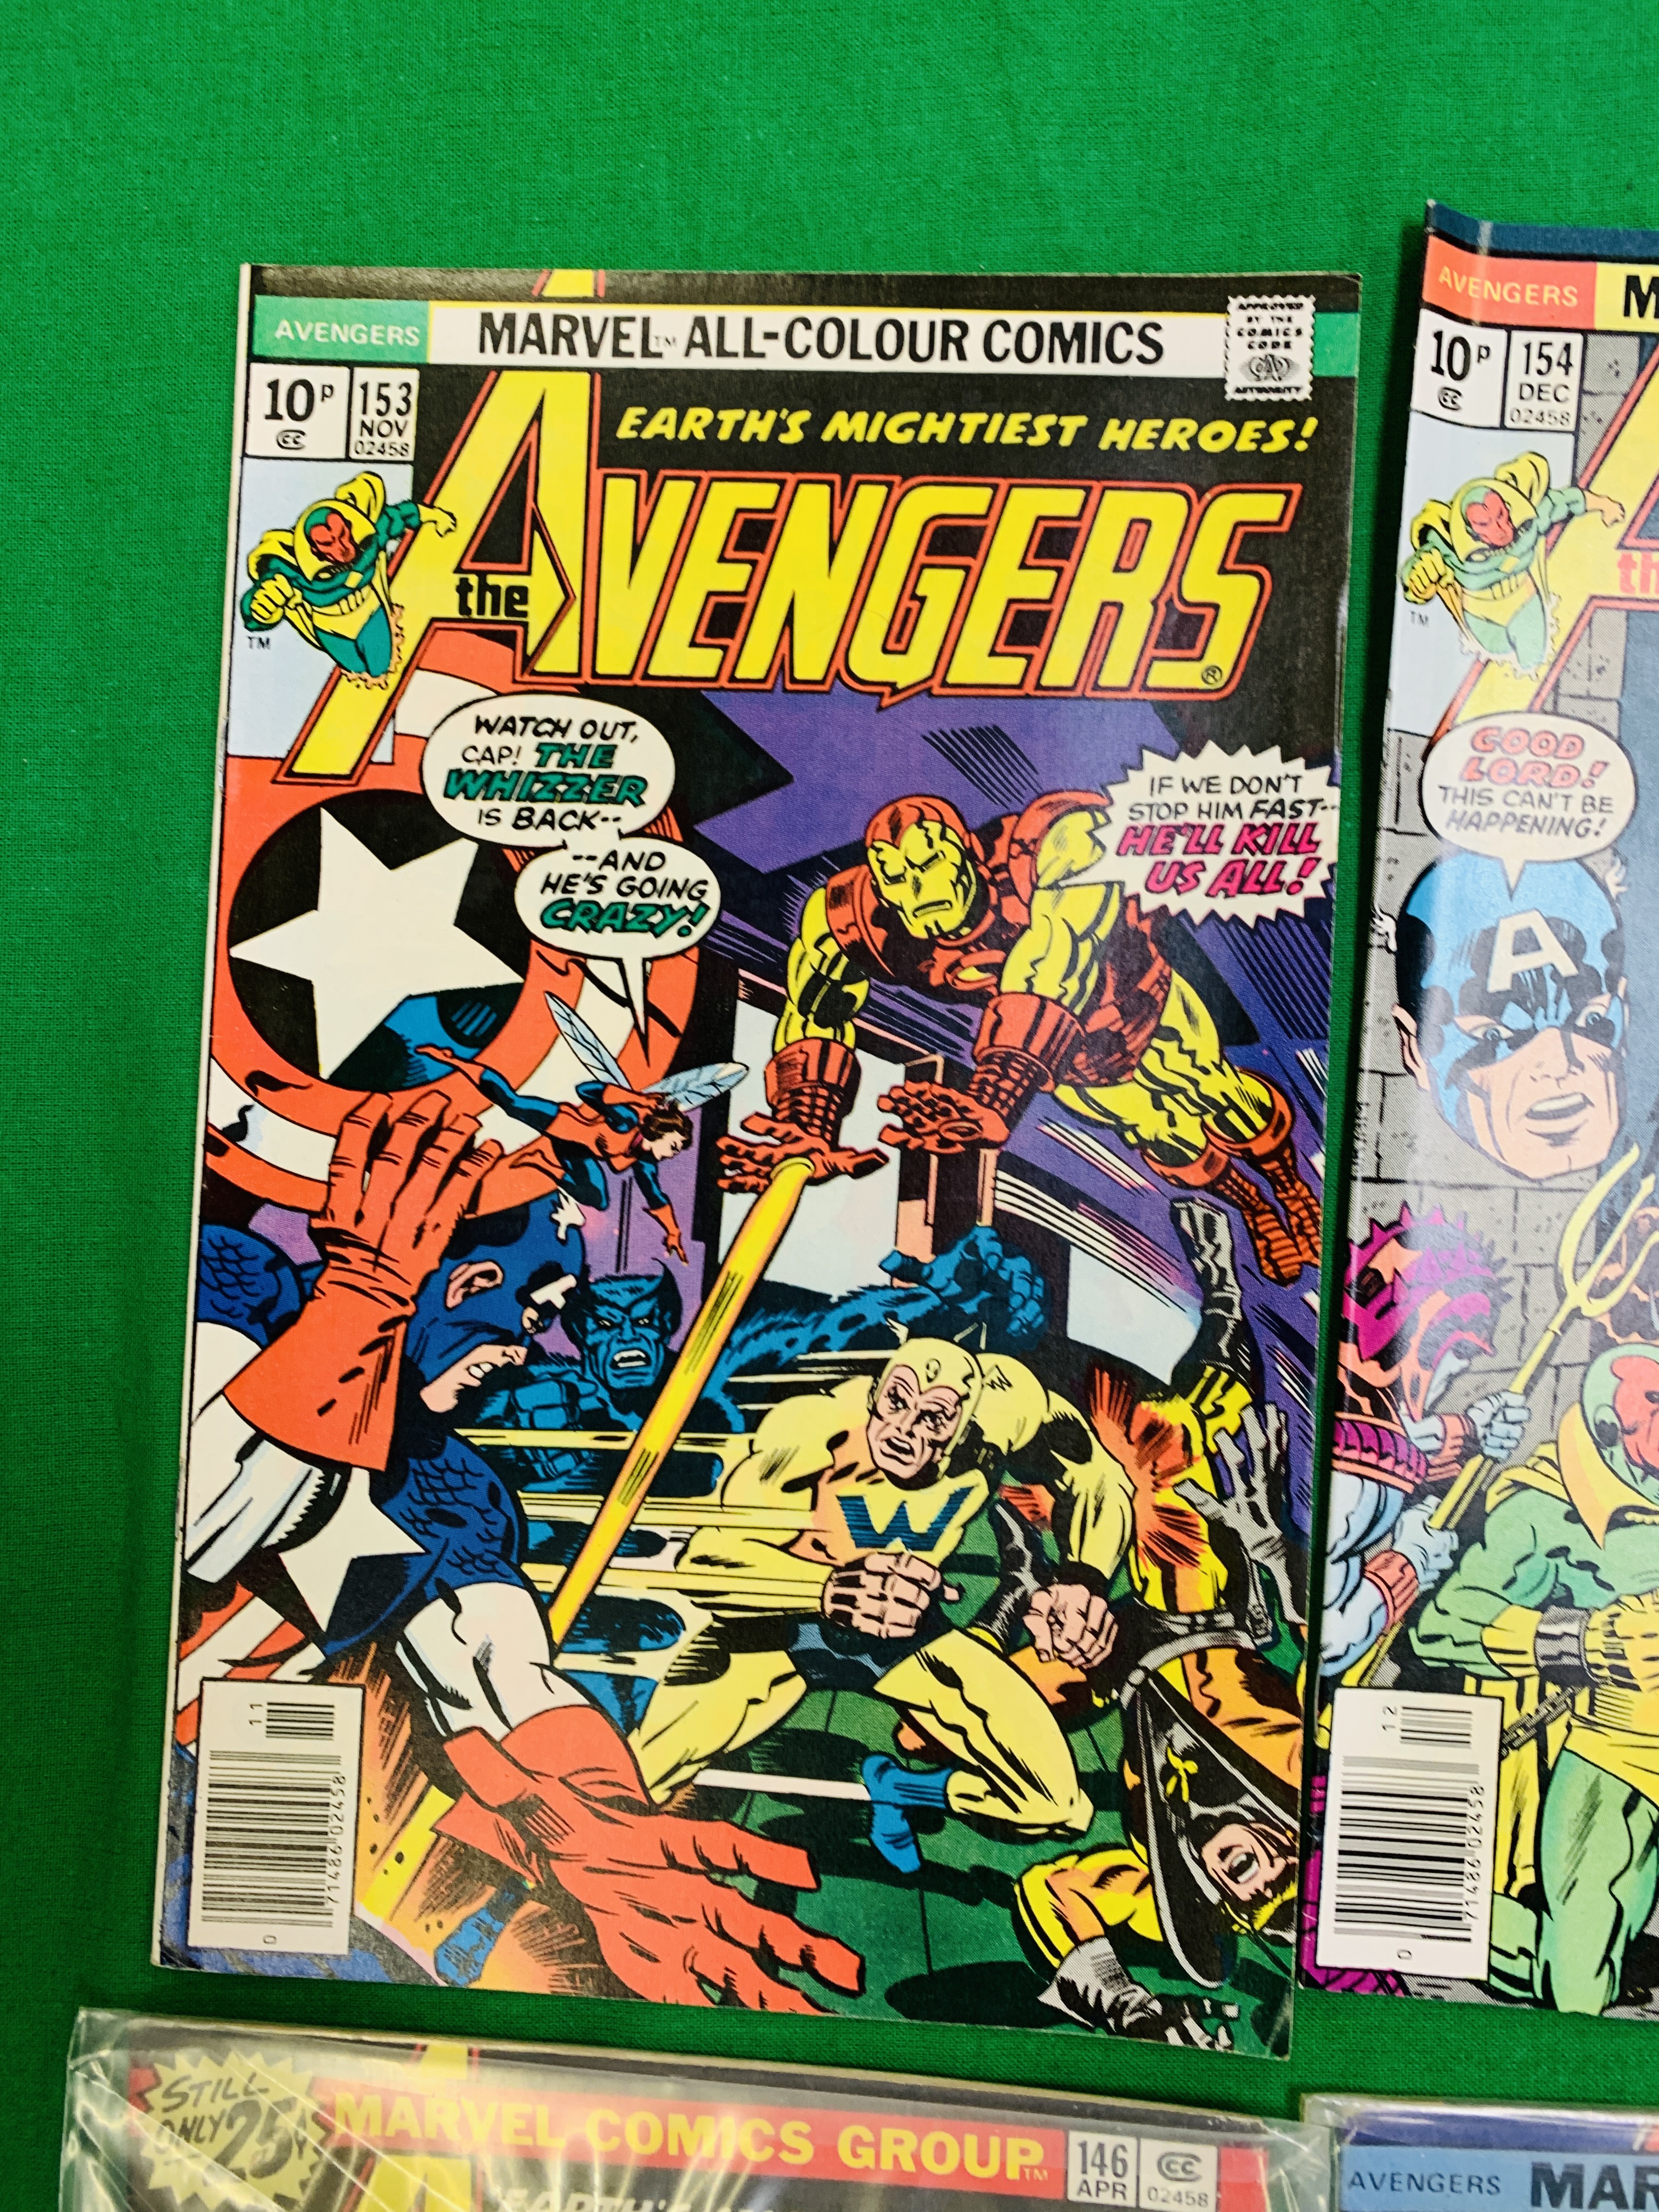 MARVEL COMICS THE AVENGERS NO. 101 - 299, MISSING ISSUES 103 AND 110. - Image 45 of 130